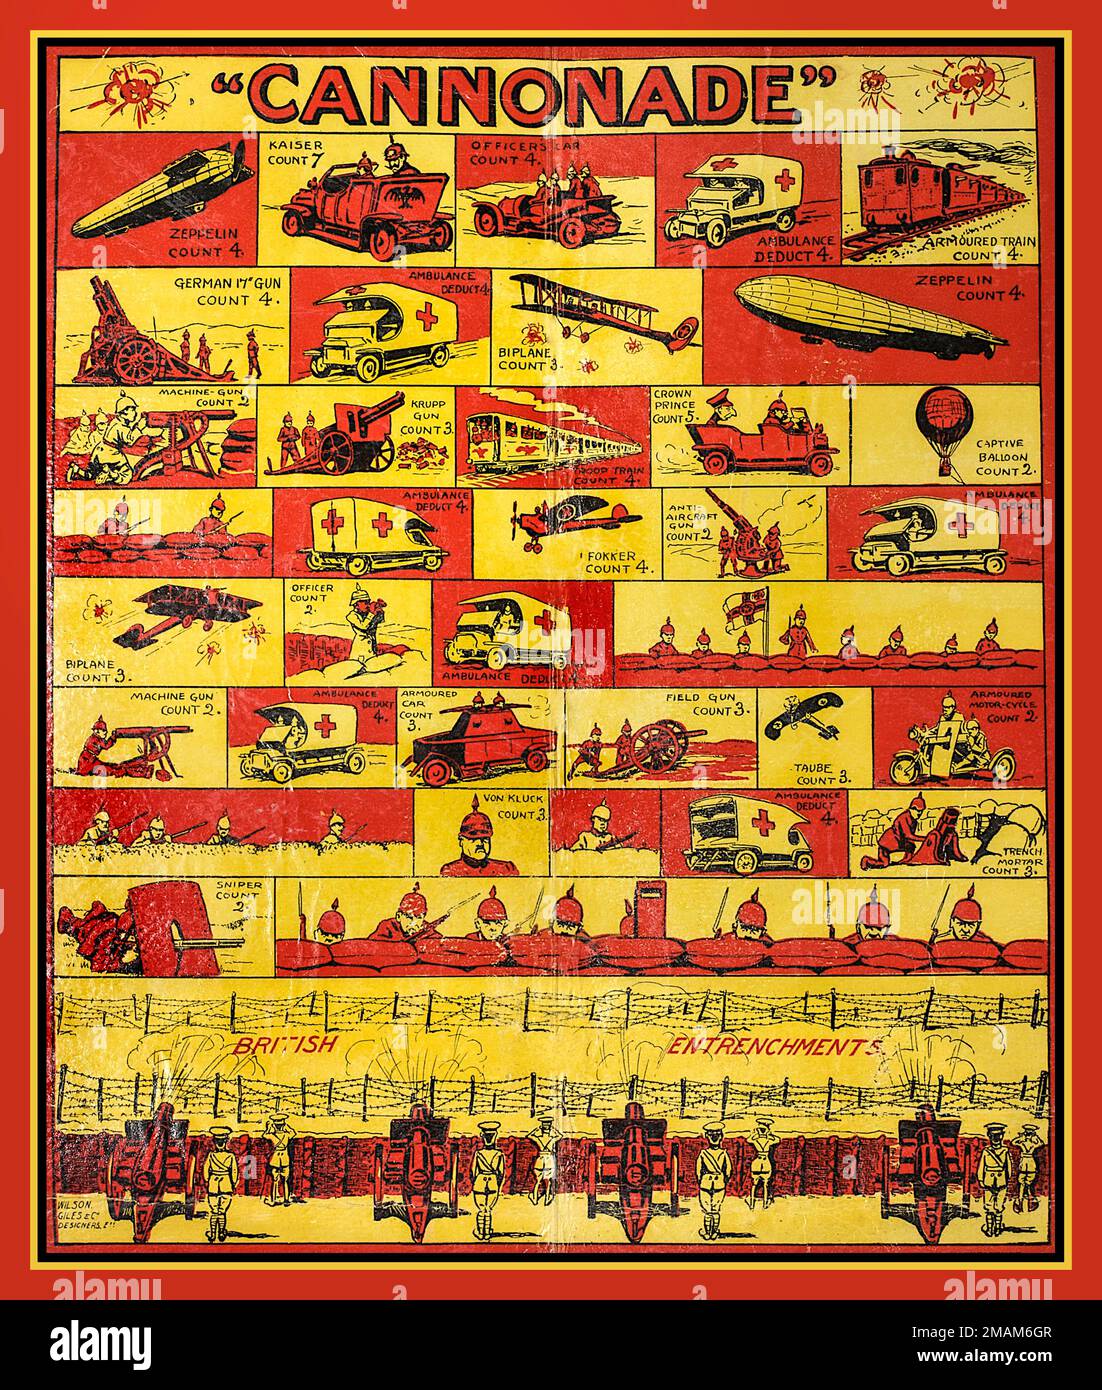 WW1 Board game illustrating the conflict with German Imperial Army  'Cannonade' board game produced 1916  The “Cannonade” board game shows patriotic fervour back home during World War 1 in New Zealand Stock Photo